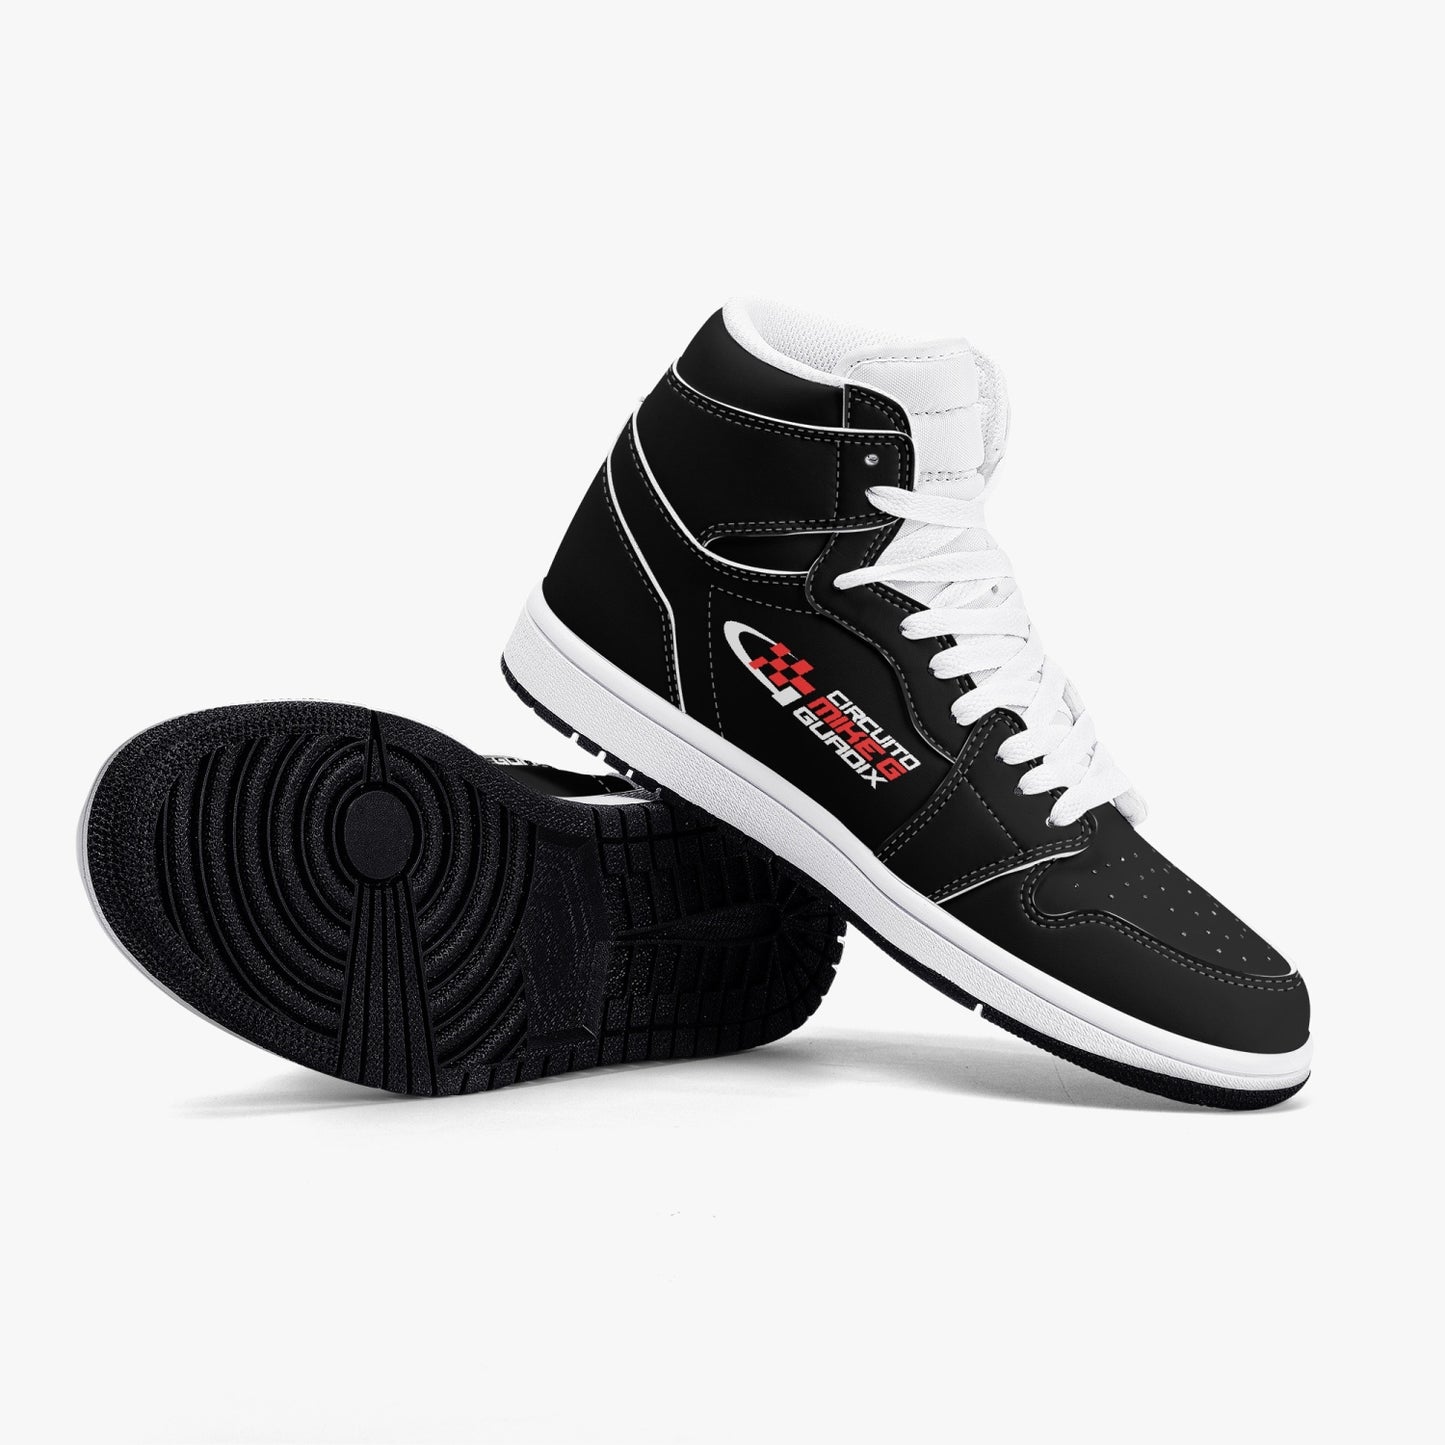 CIRCUITO MIKE G GUADIX Ultimate High-Top Leather Sneakers - full carbon